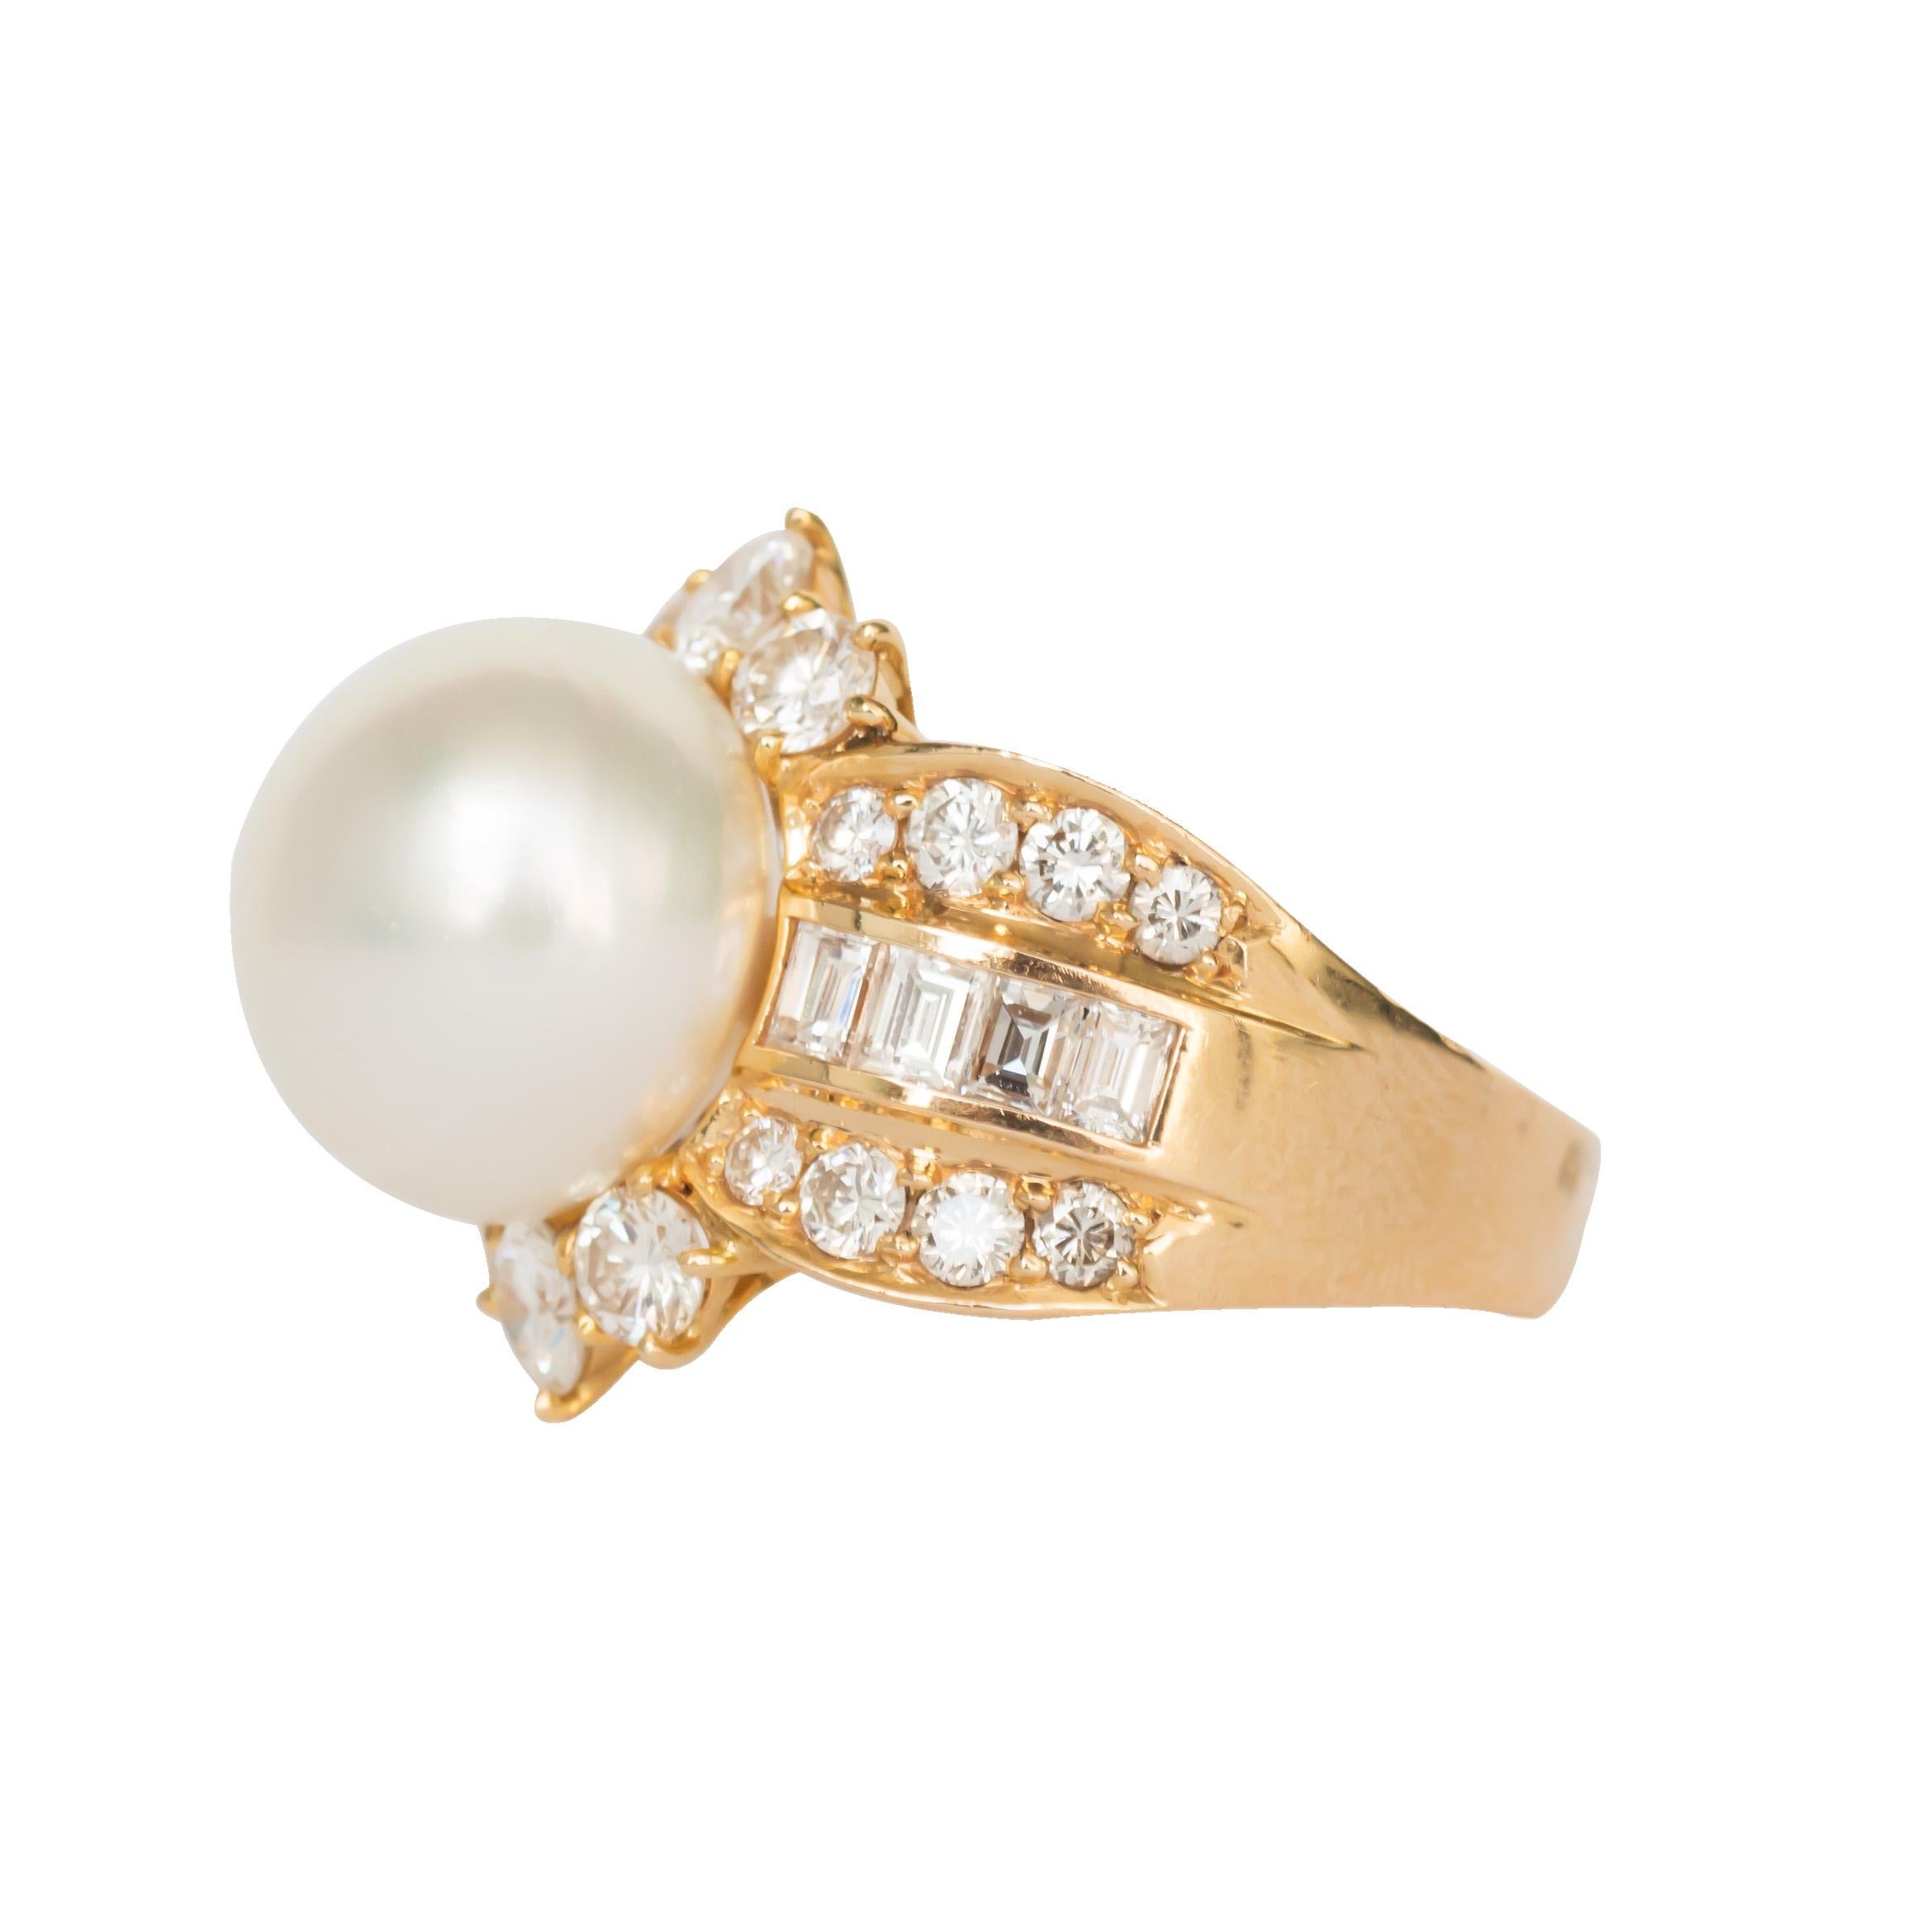 Designer: Kwiat 
Item Details: 
Ring Size: 6.95
Metal Type: Yellow Gold
Weight: 11 grams

Center Diamond Details
Shape: Natural Pearl
MM Weight: 12.7mm
AAA+Quality. Excellent Luster

Side Stone Details: 
Shape: Round Brilliant 
Total Carat Weight: